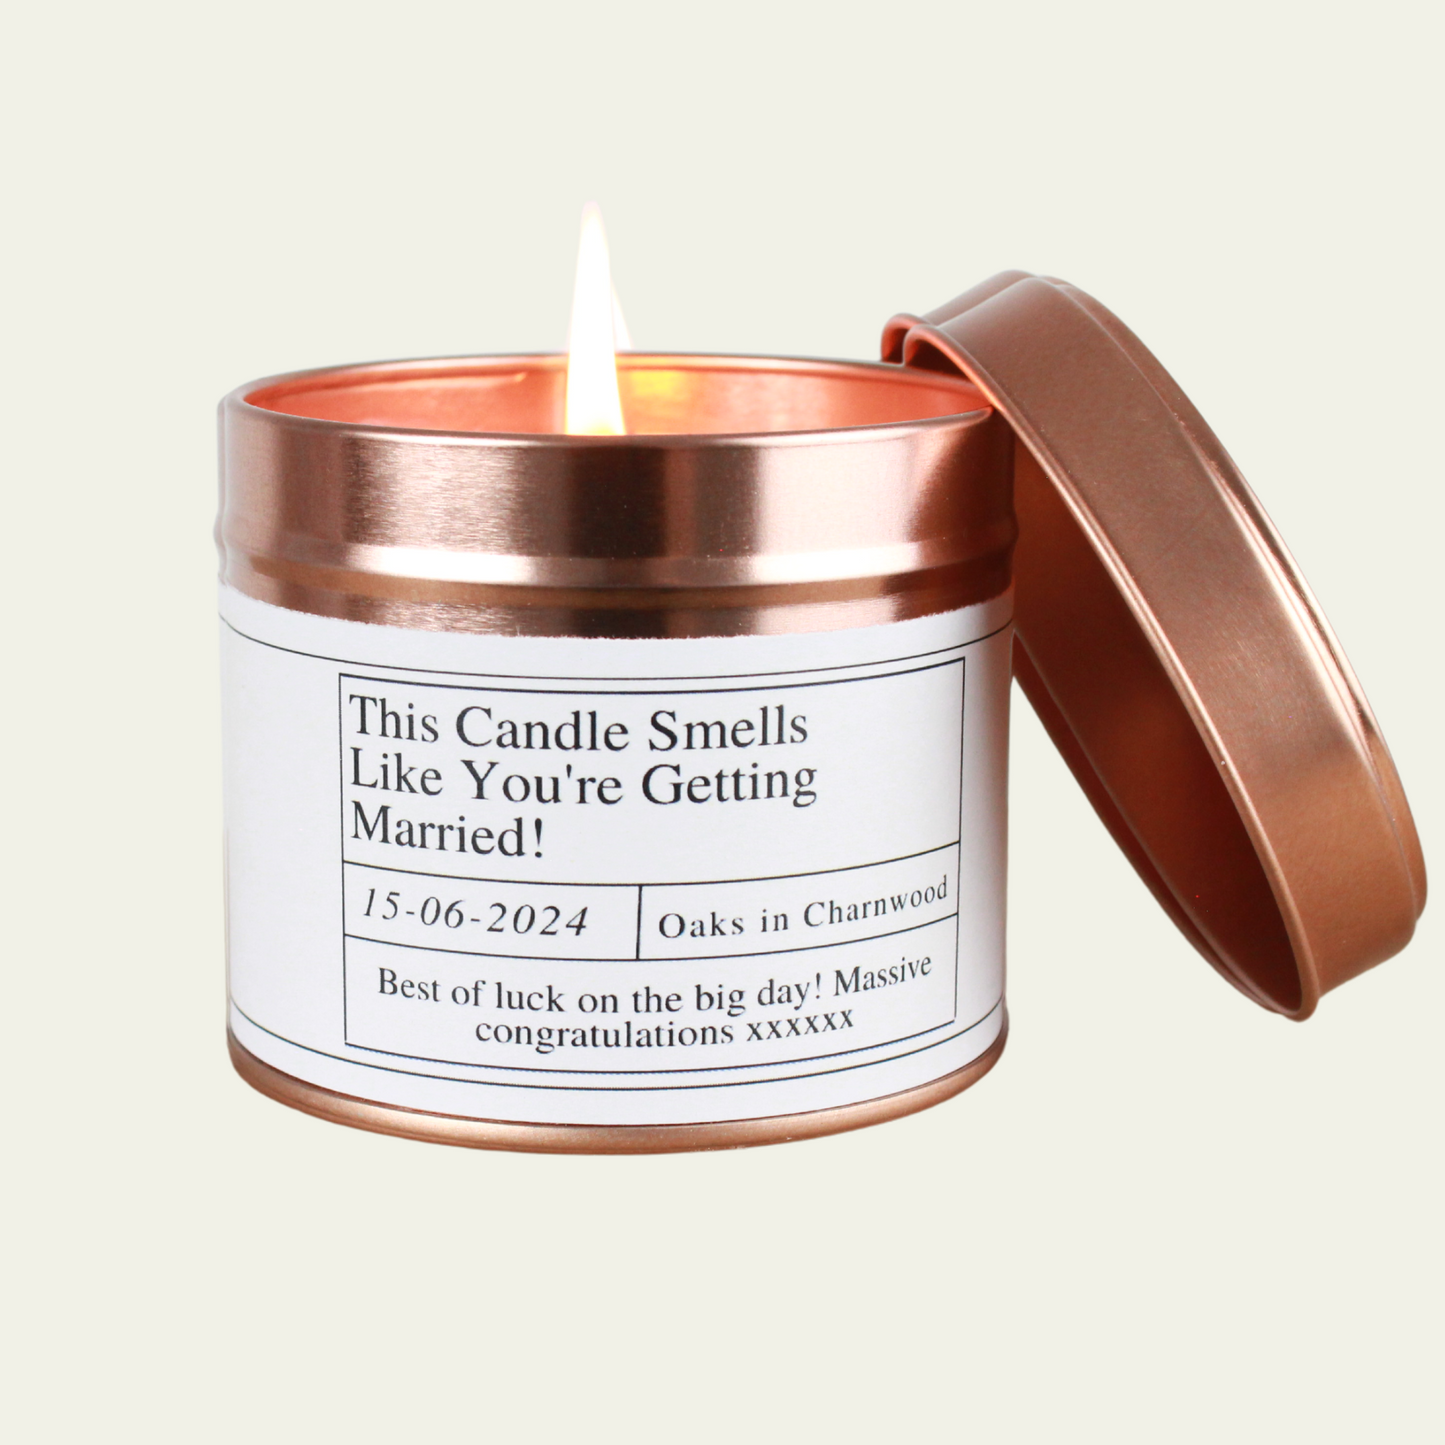 Smells like you're getting Married Wedding Candle Gift - Hideaway Home Fragrances